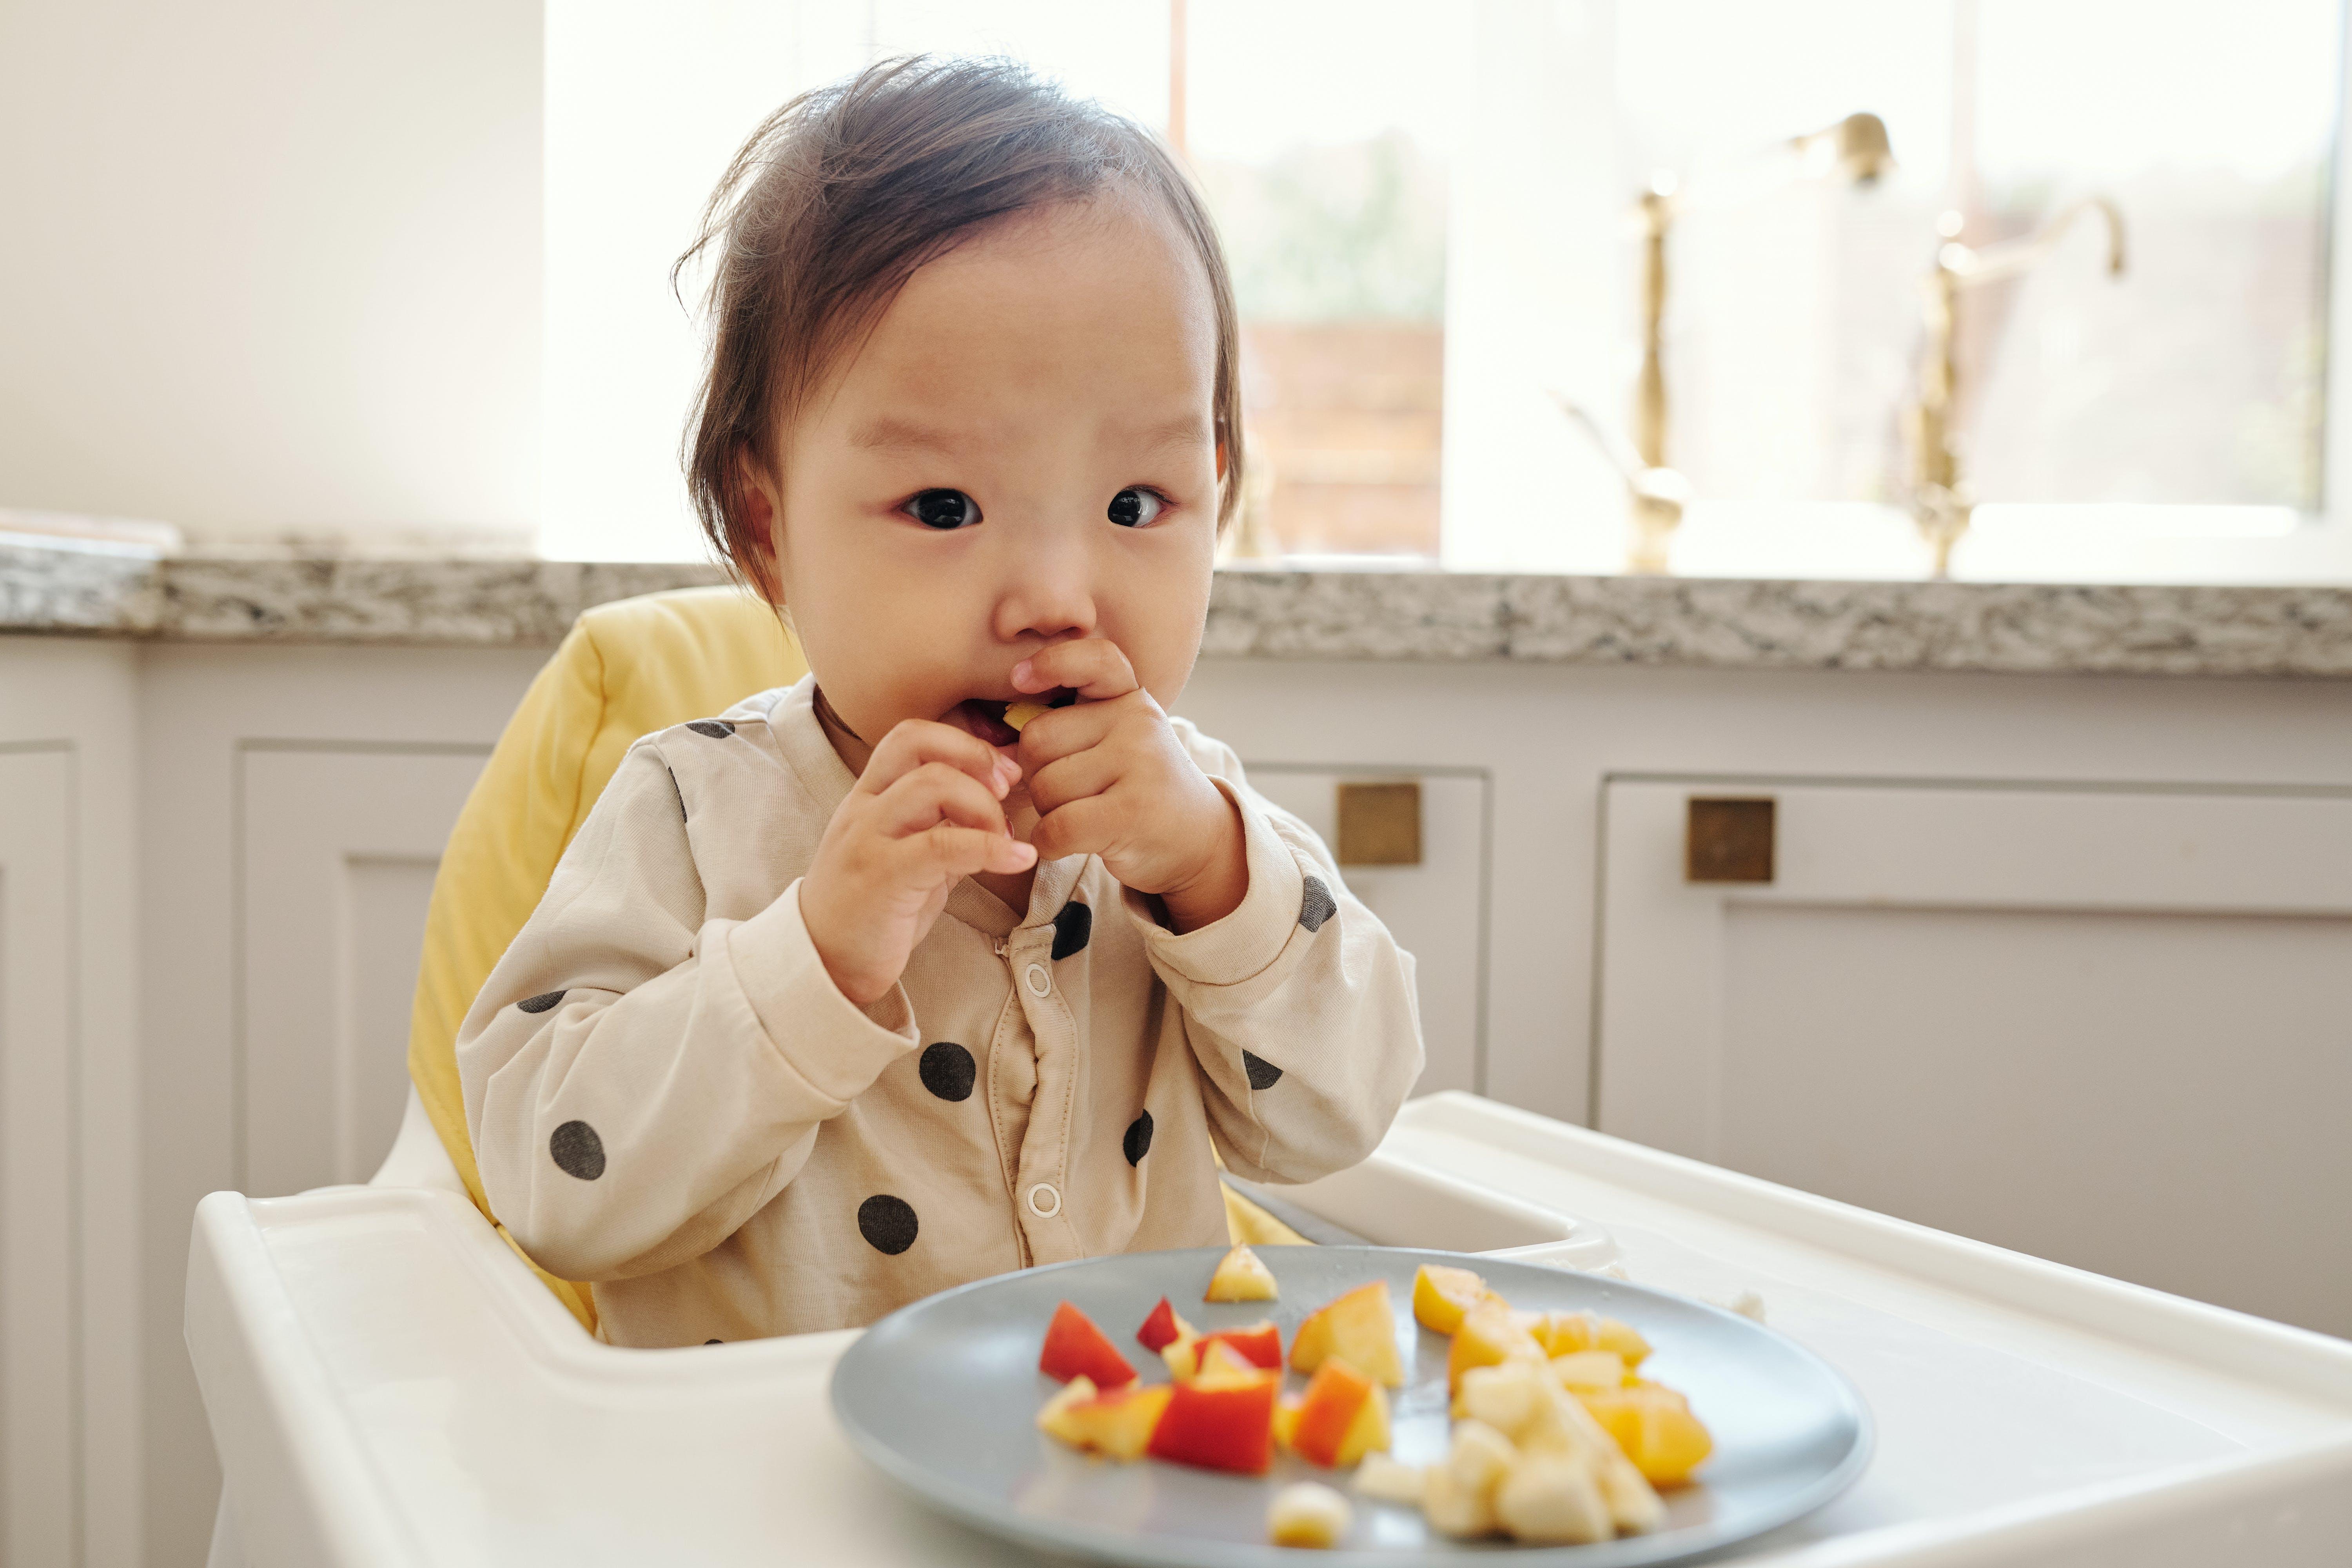 Does baby move more when hungry? 